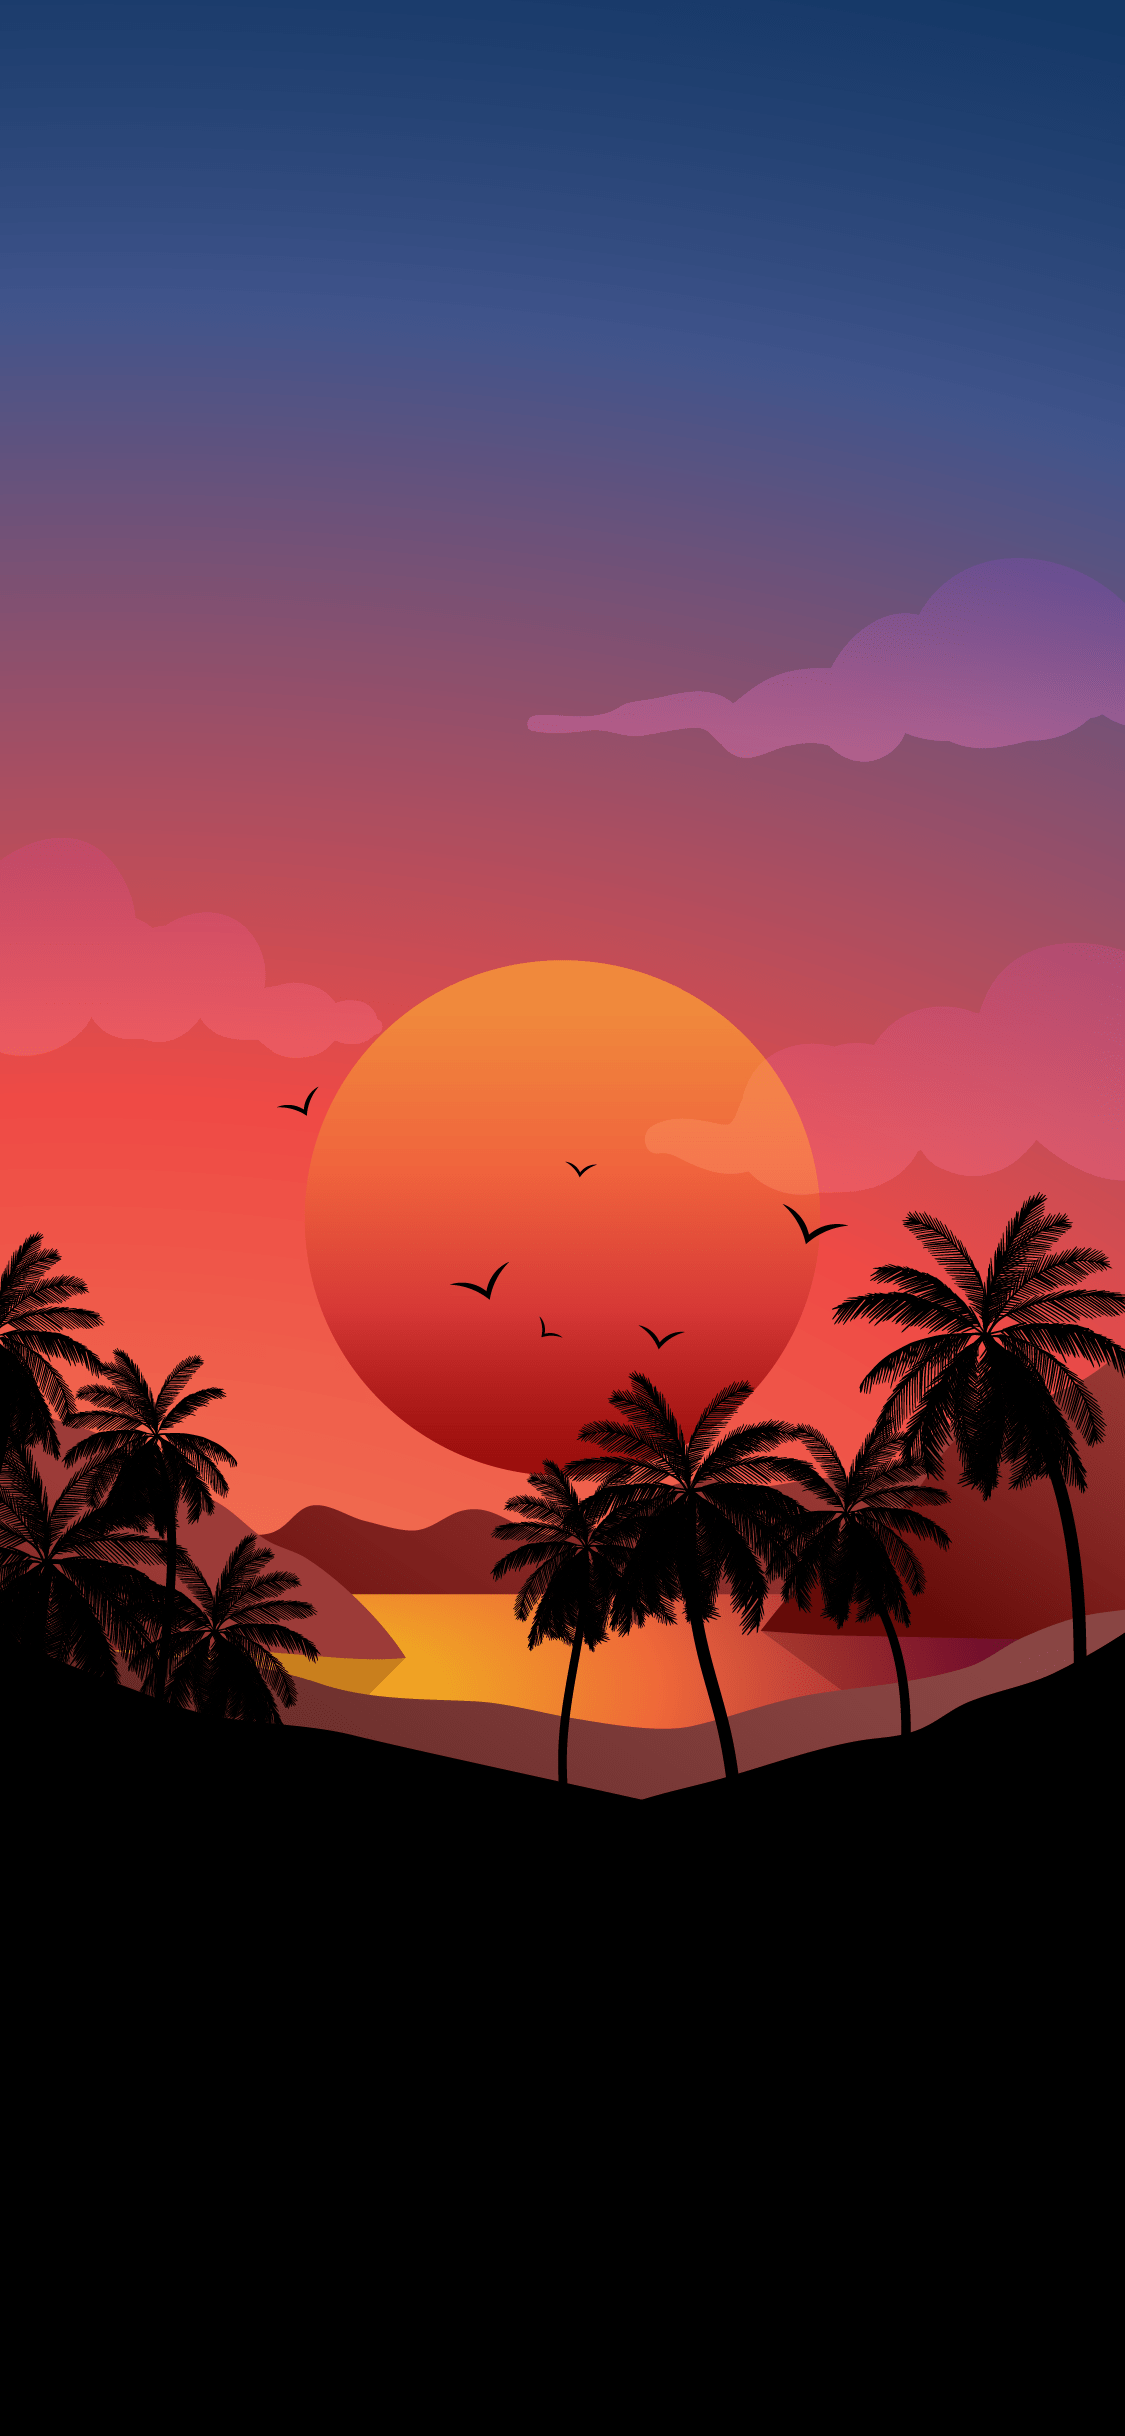 A sunset over a beach with palm trees - Sunset